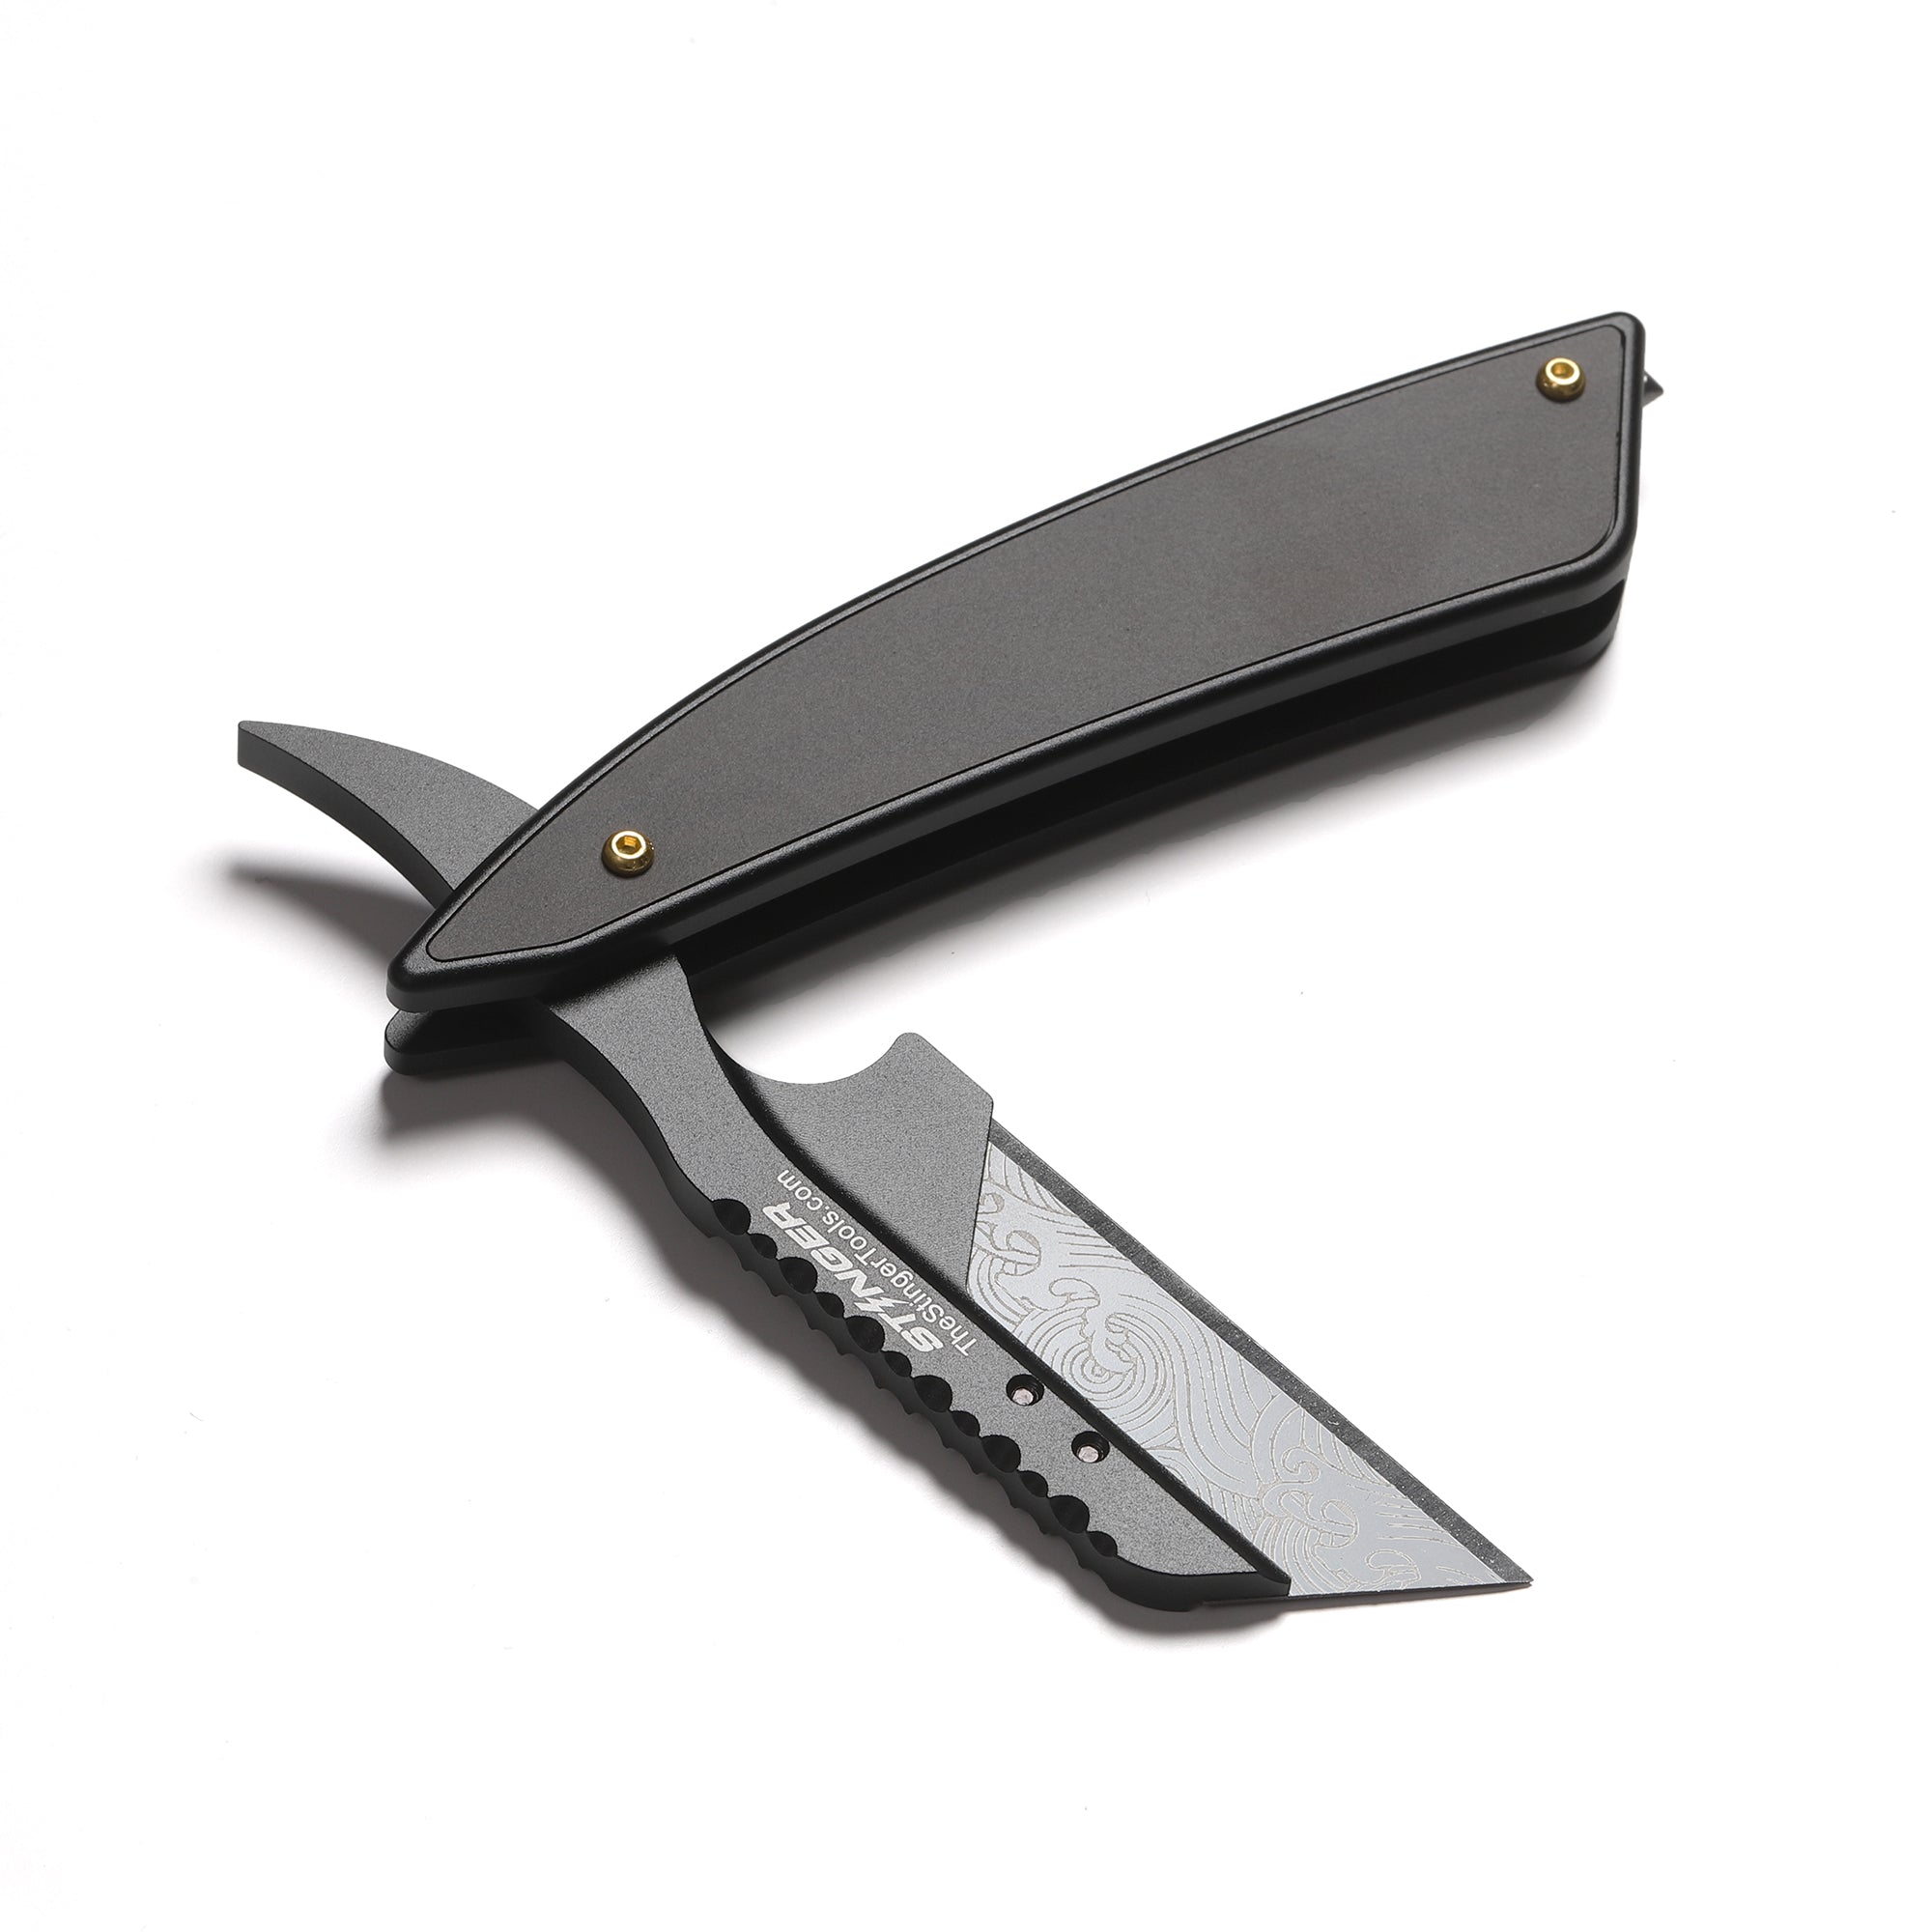 OLFA 34b Craft Knife L-type Product Code 415146 for sale online